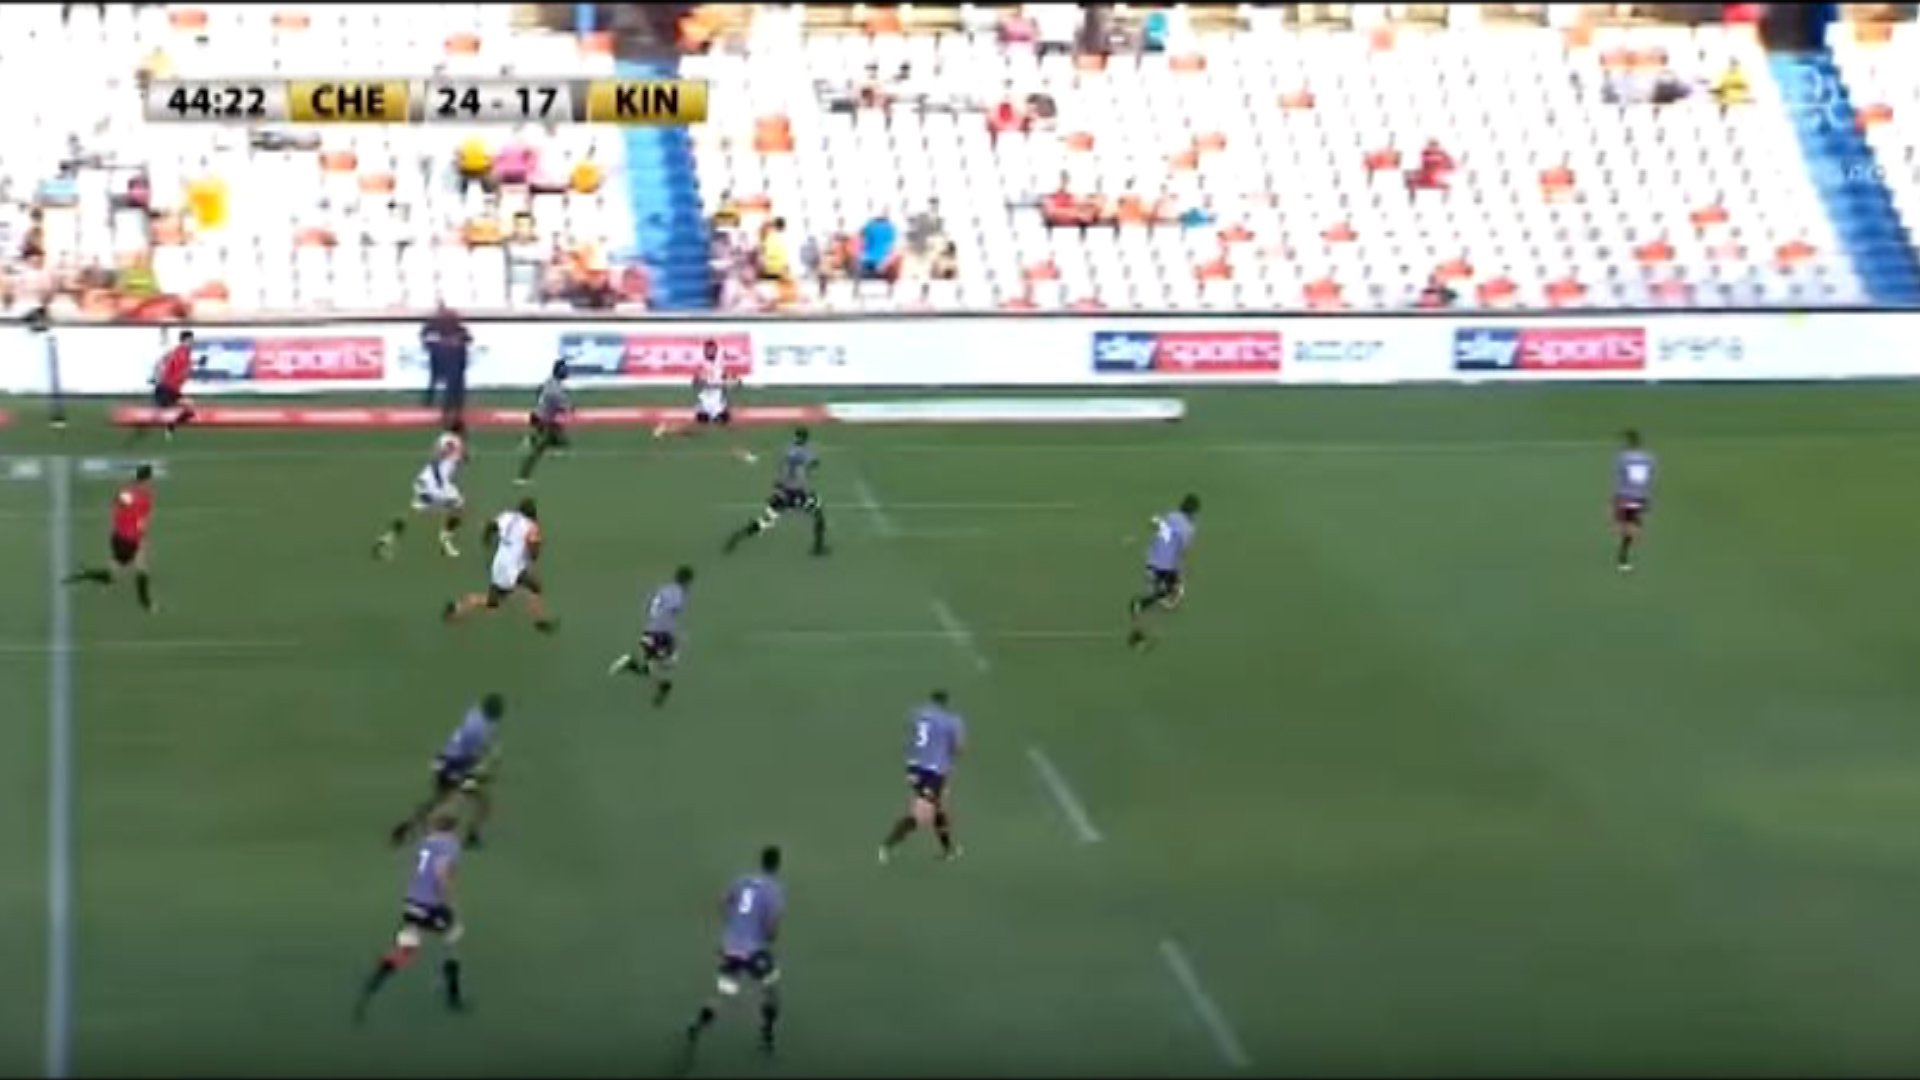 WATCH: 110kg Cheetahs loosehead 'Ox' shows serious wheels to get onto chip over the top